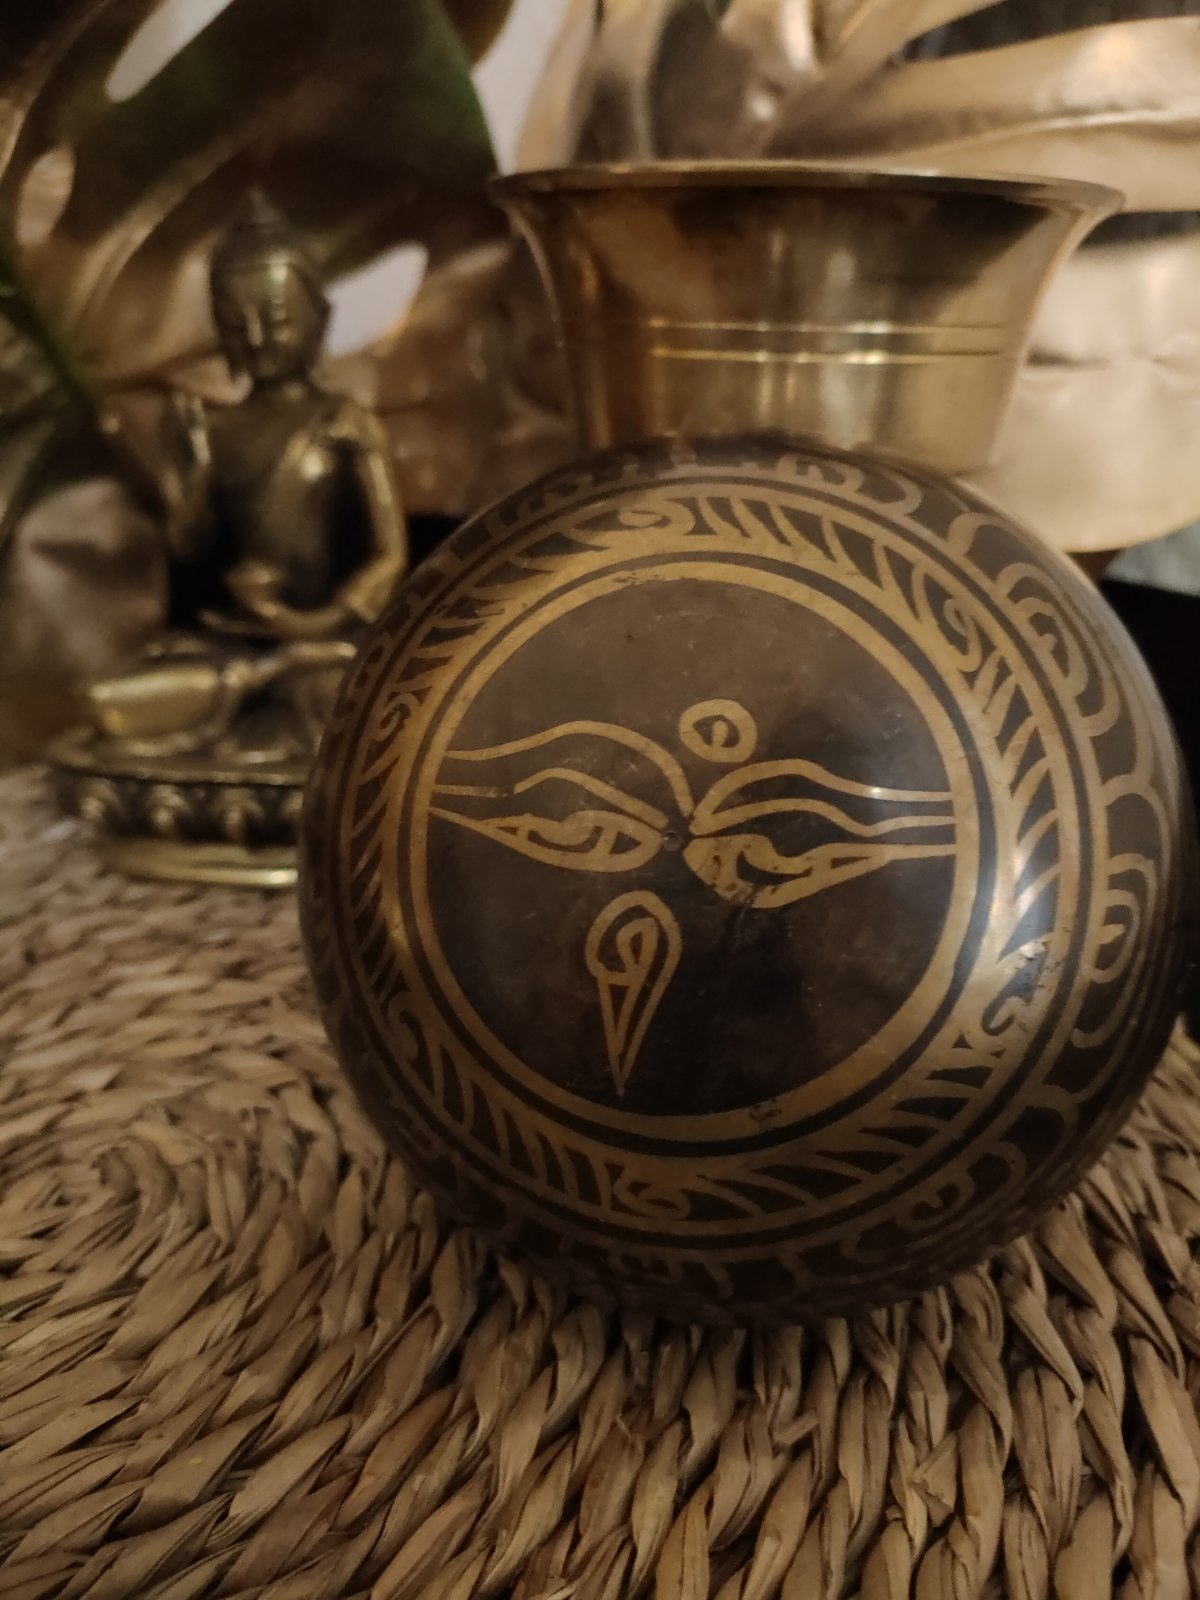 Hand Crafted Singing Bowl With Mantra and Buddha Eye Carving